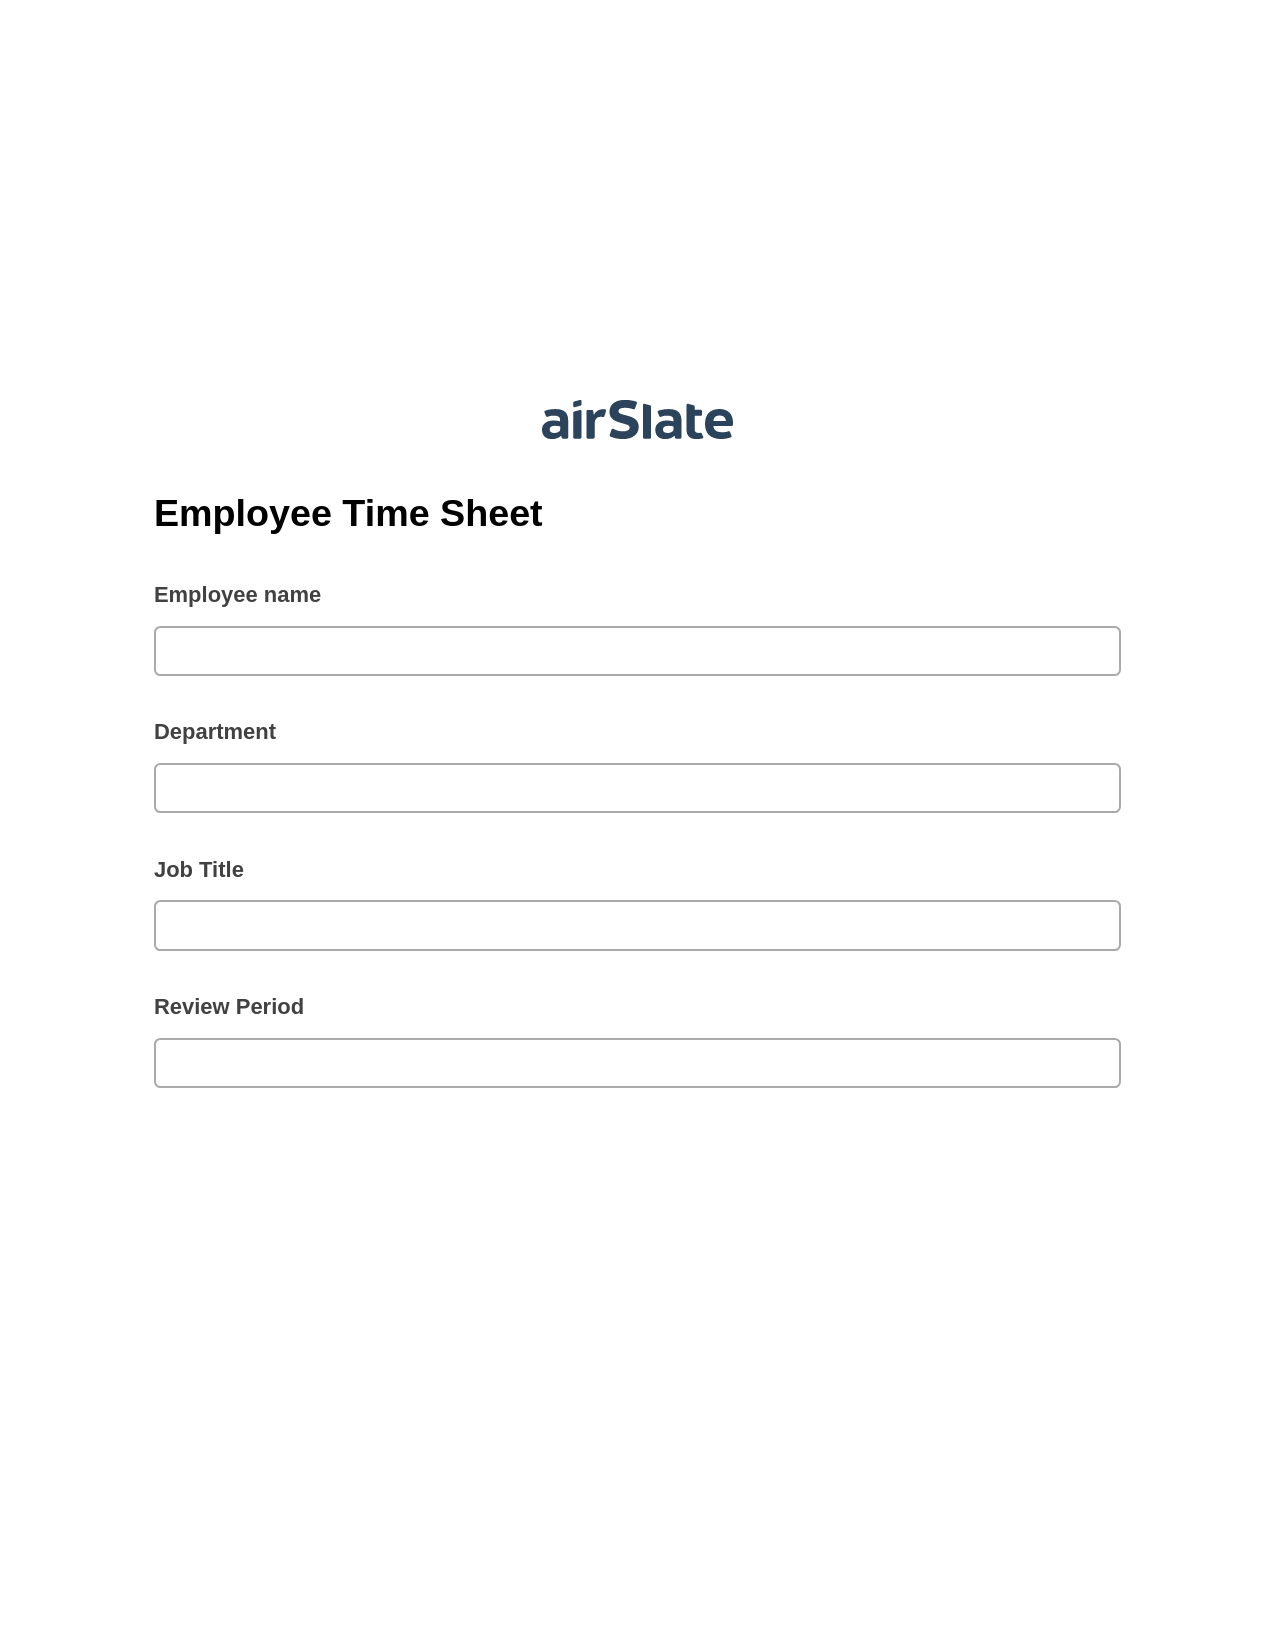 Multirole Employee Time Sheet Pre-fill Dropdowns from Excel Bot, Create slate addon, Archive to Box Bot